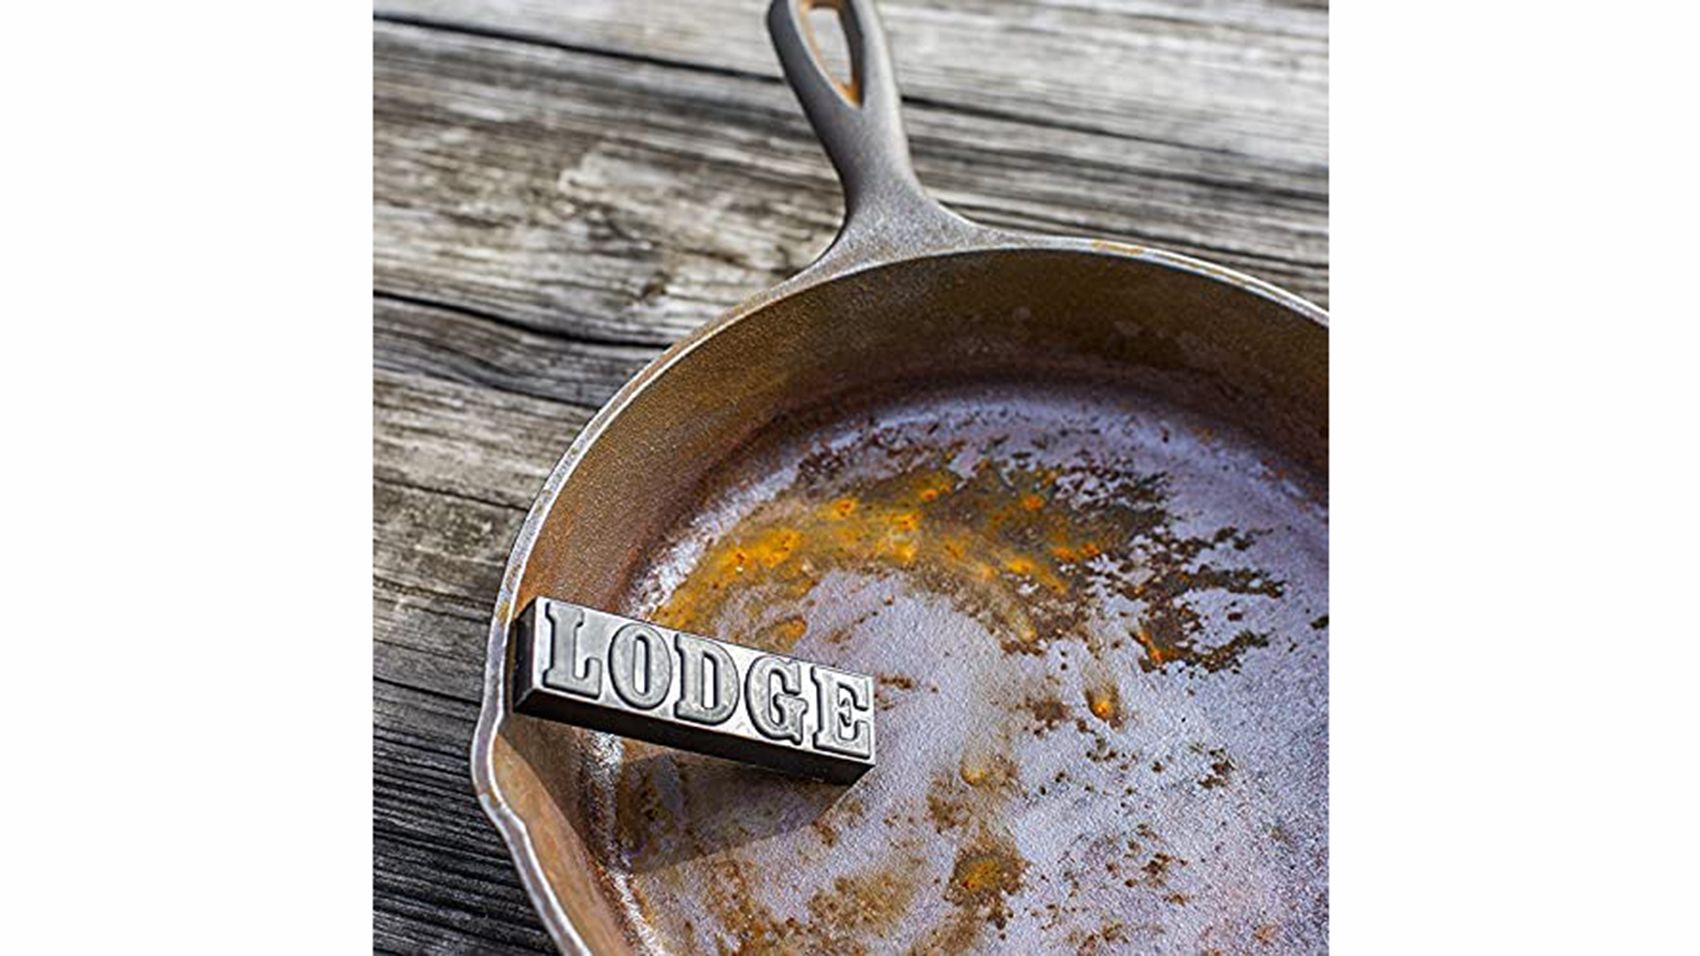 How to Clean a Rusty Cast-Iron Skillet